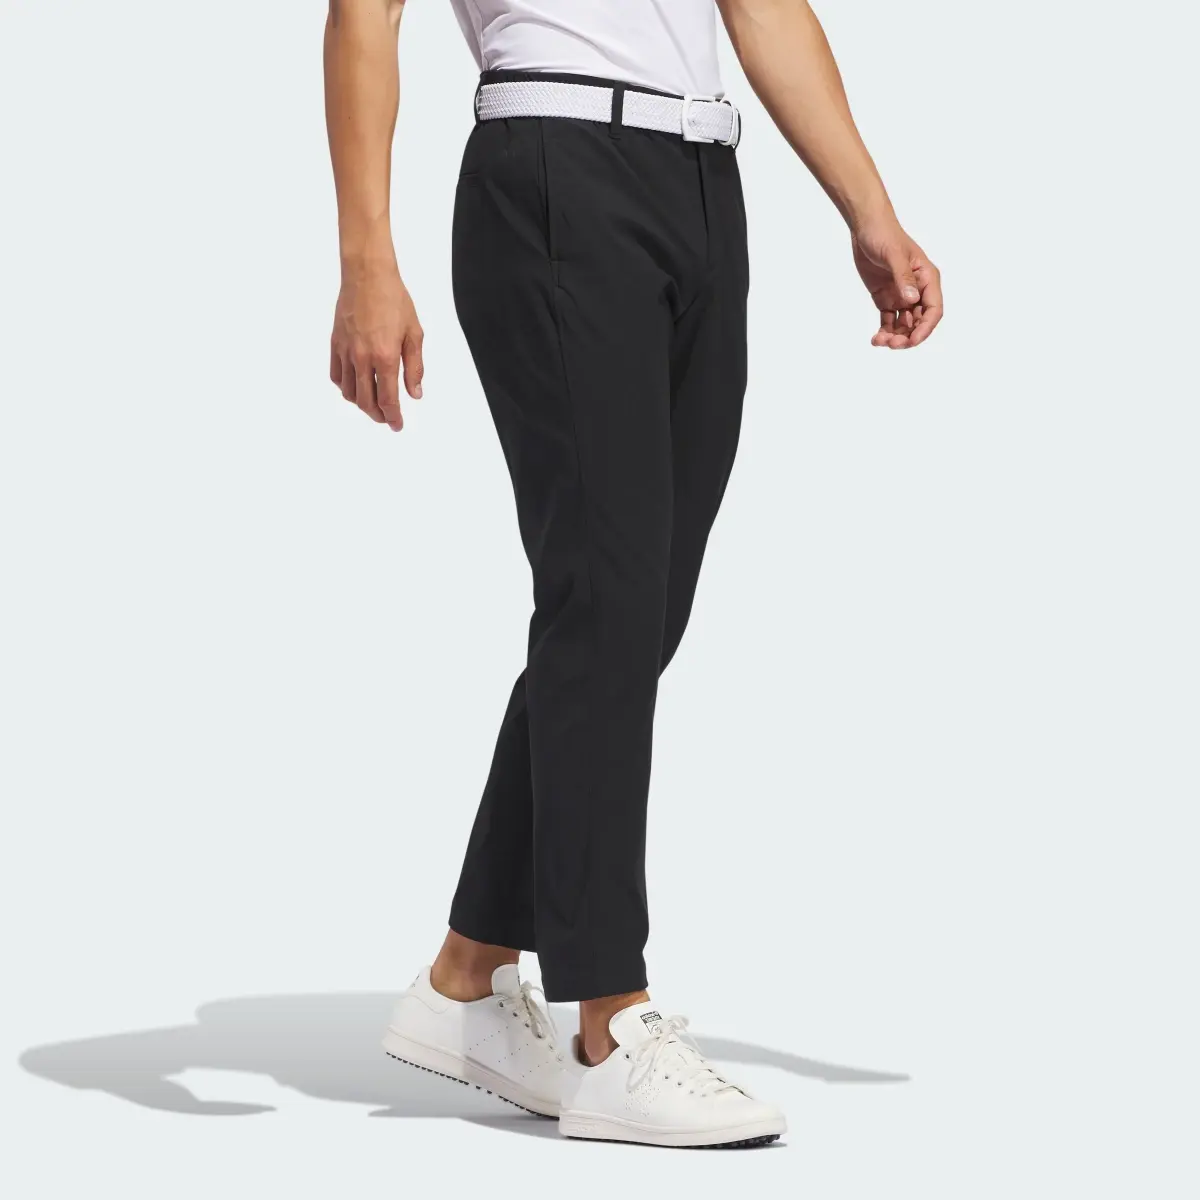 Adidas Ultimate365 Chino Trousers. 3